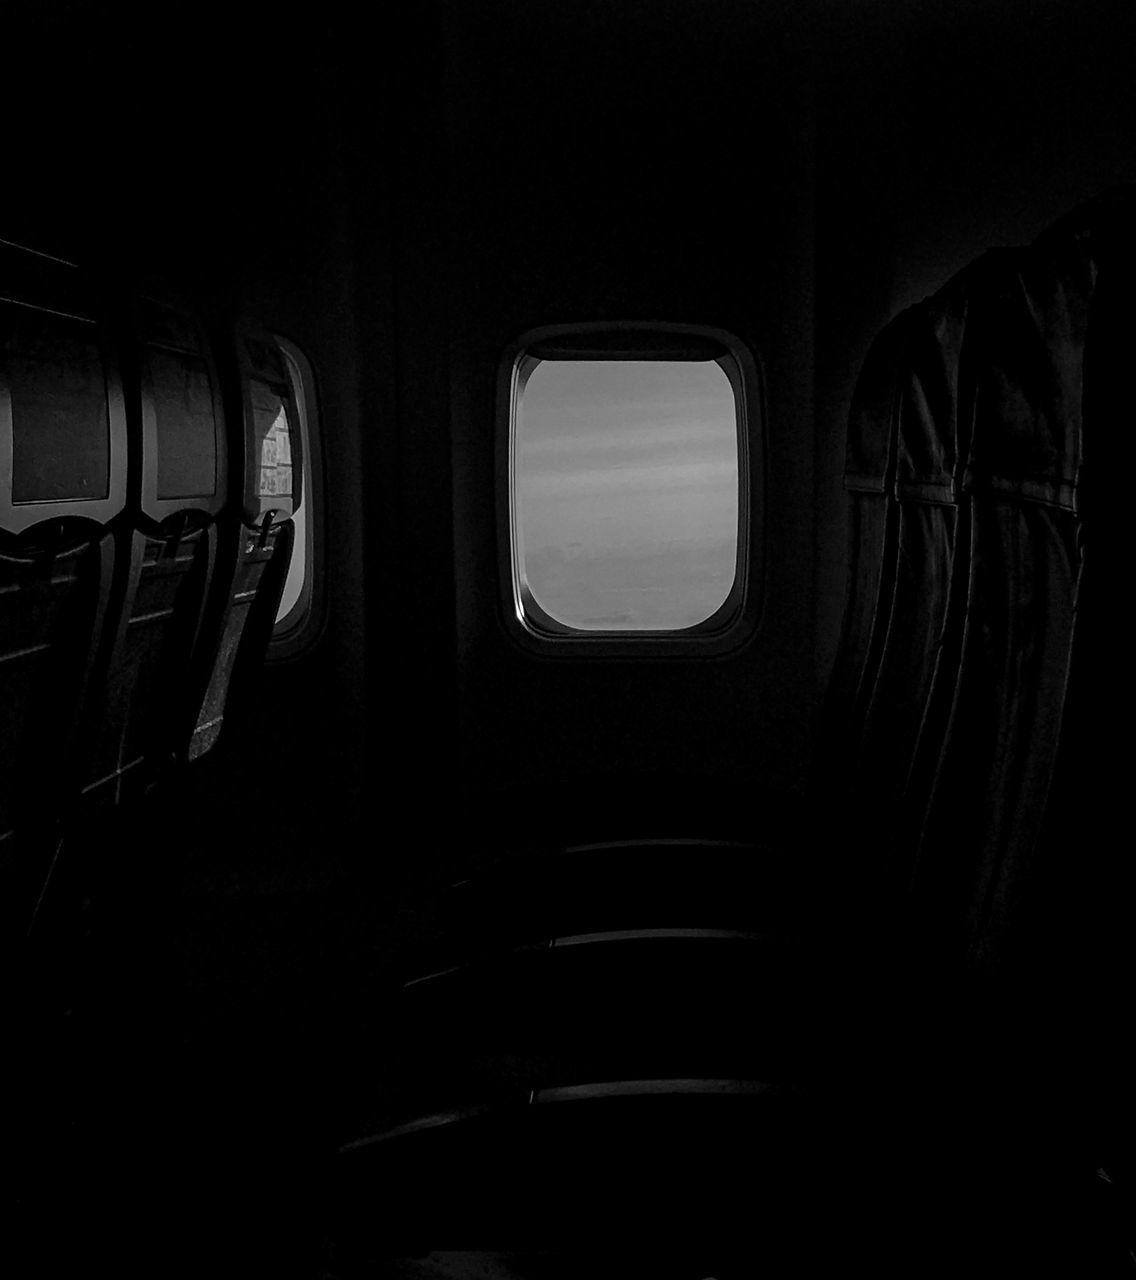 black, darkness, black and white, mode of transportation, light, transportation, vehicle interior, monochrome, monochrome photography, airplane, white, window, indoors, air vehicle, no people, public transportation, travel, vehicle, dark, vehicle seat, seat, automotive exterior, in a row, lighting